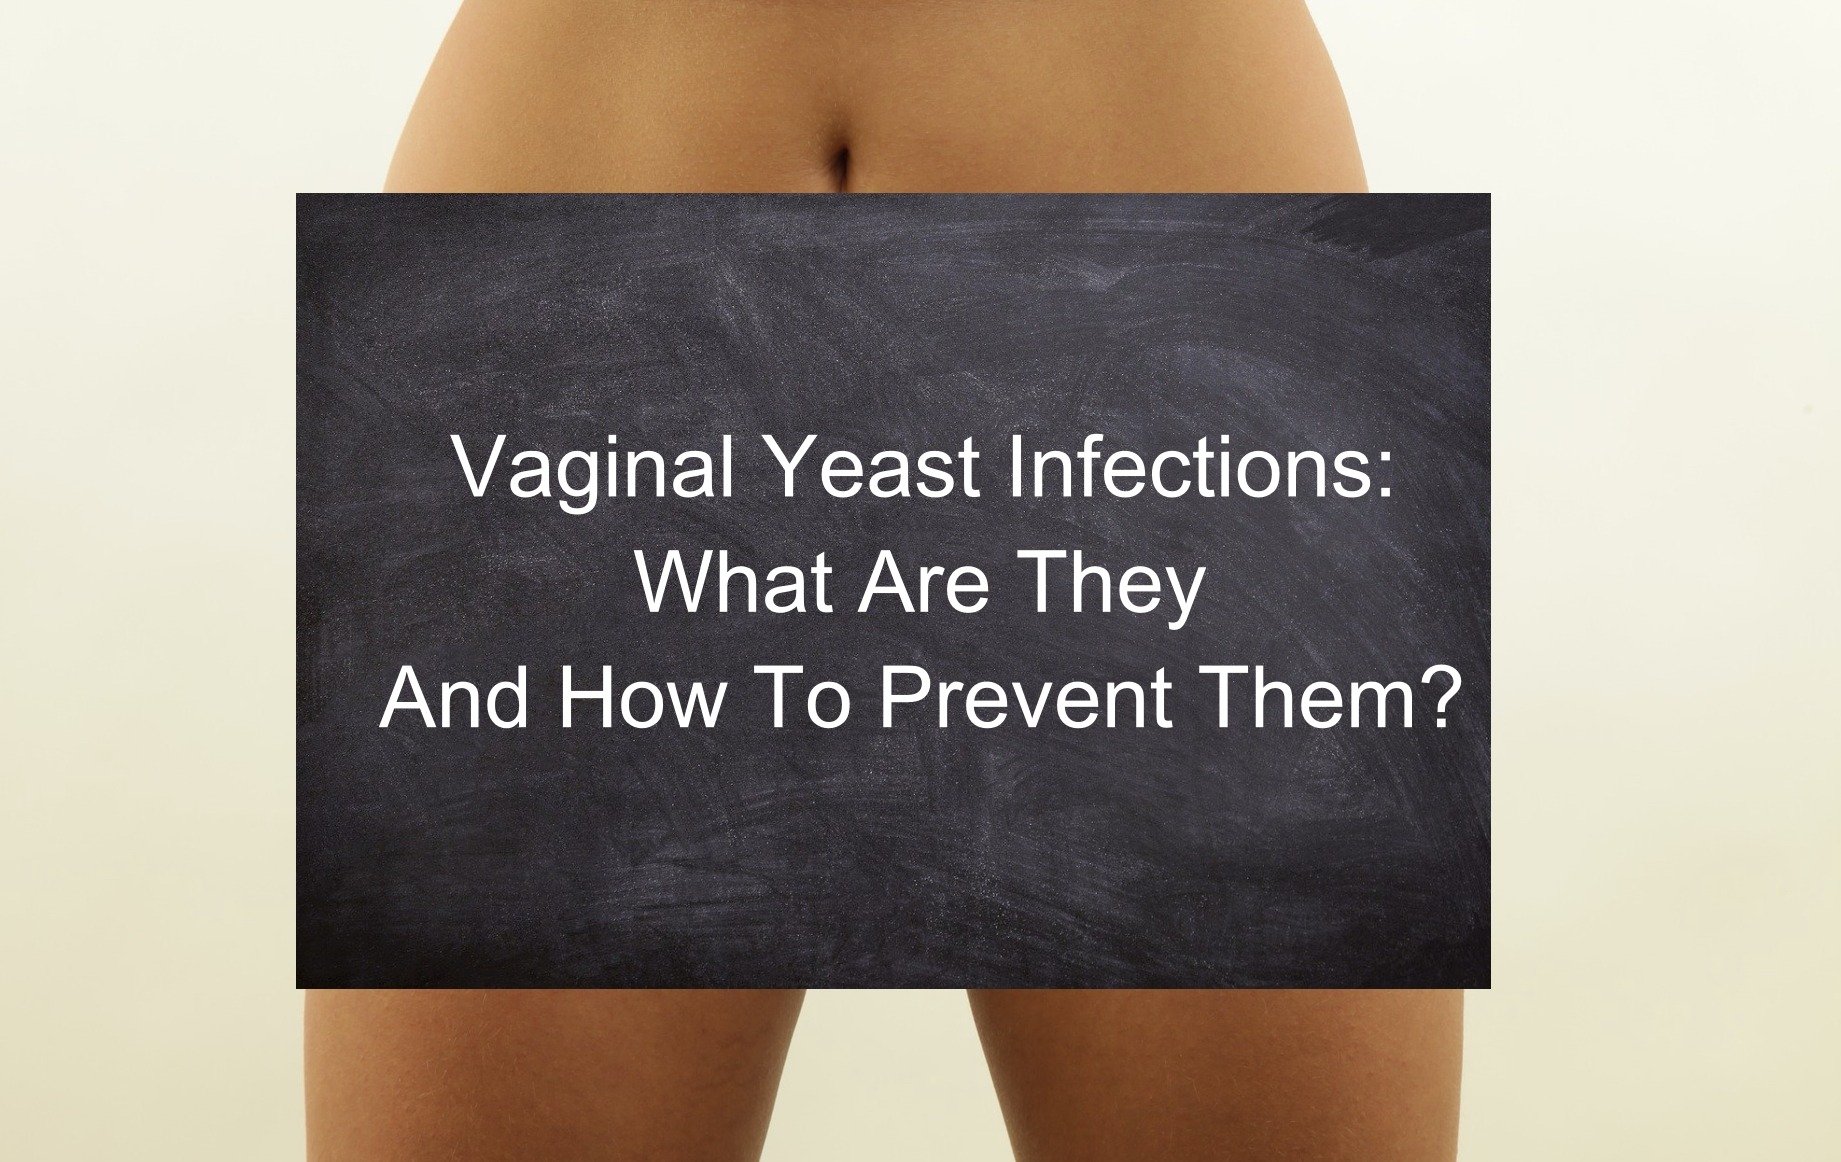 VAGINAL YEAST INFECTIONS: WHAT ARE THEY AND HOW TO PREVENT THEM?